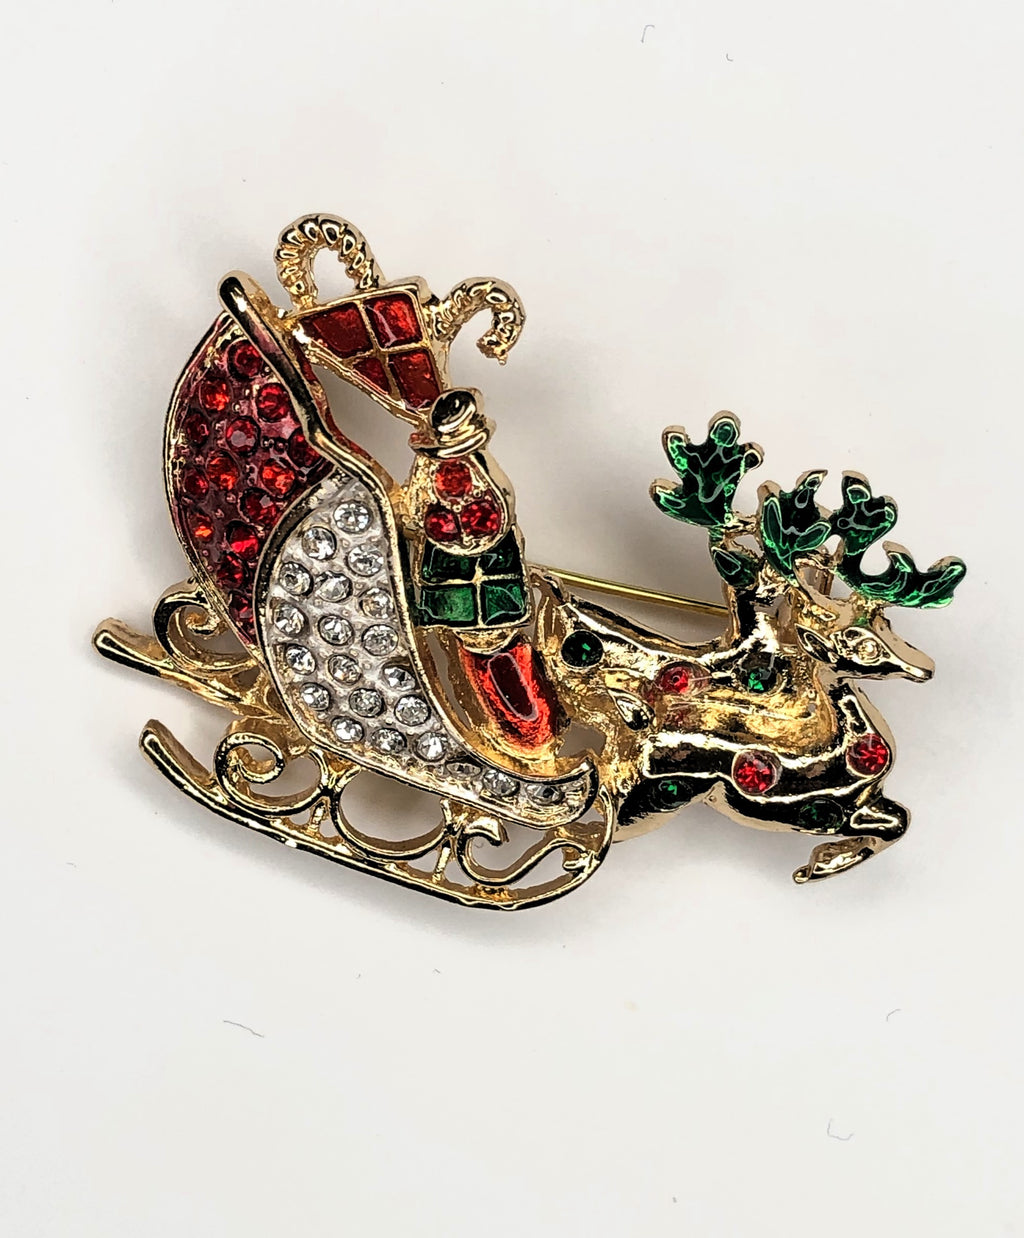 Sleigh with Christmas gifts pulled by two reindeers brooch at erika